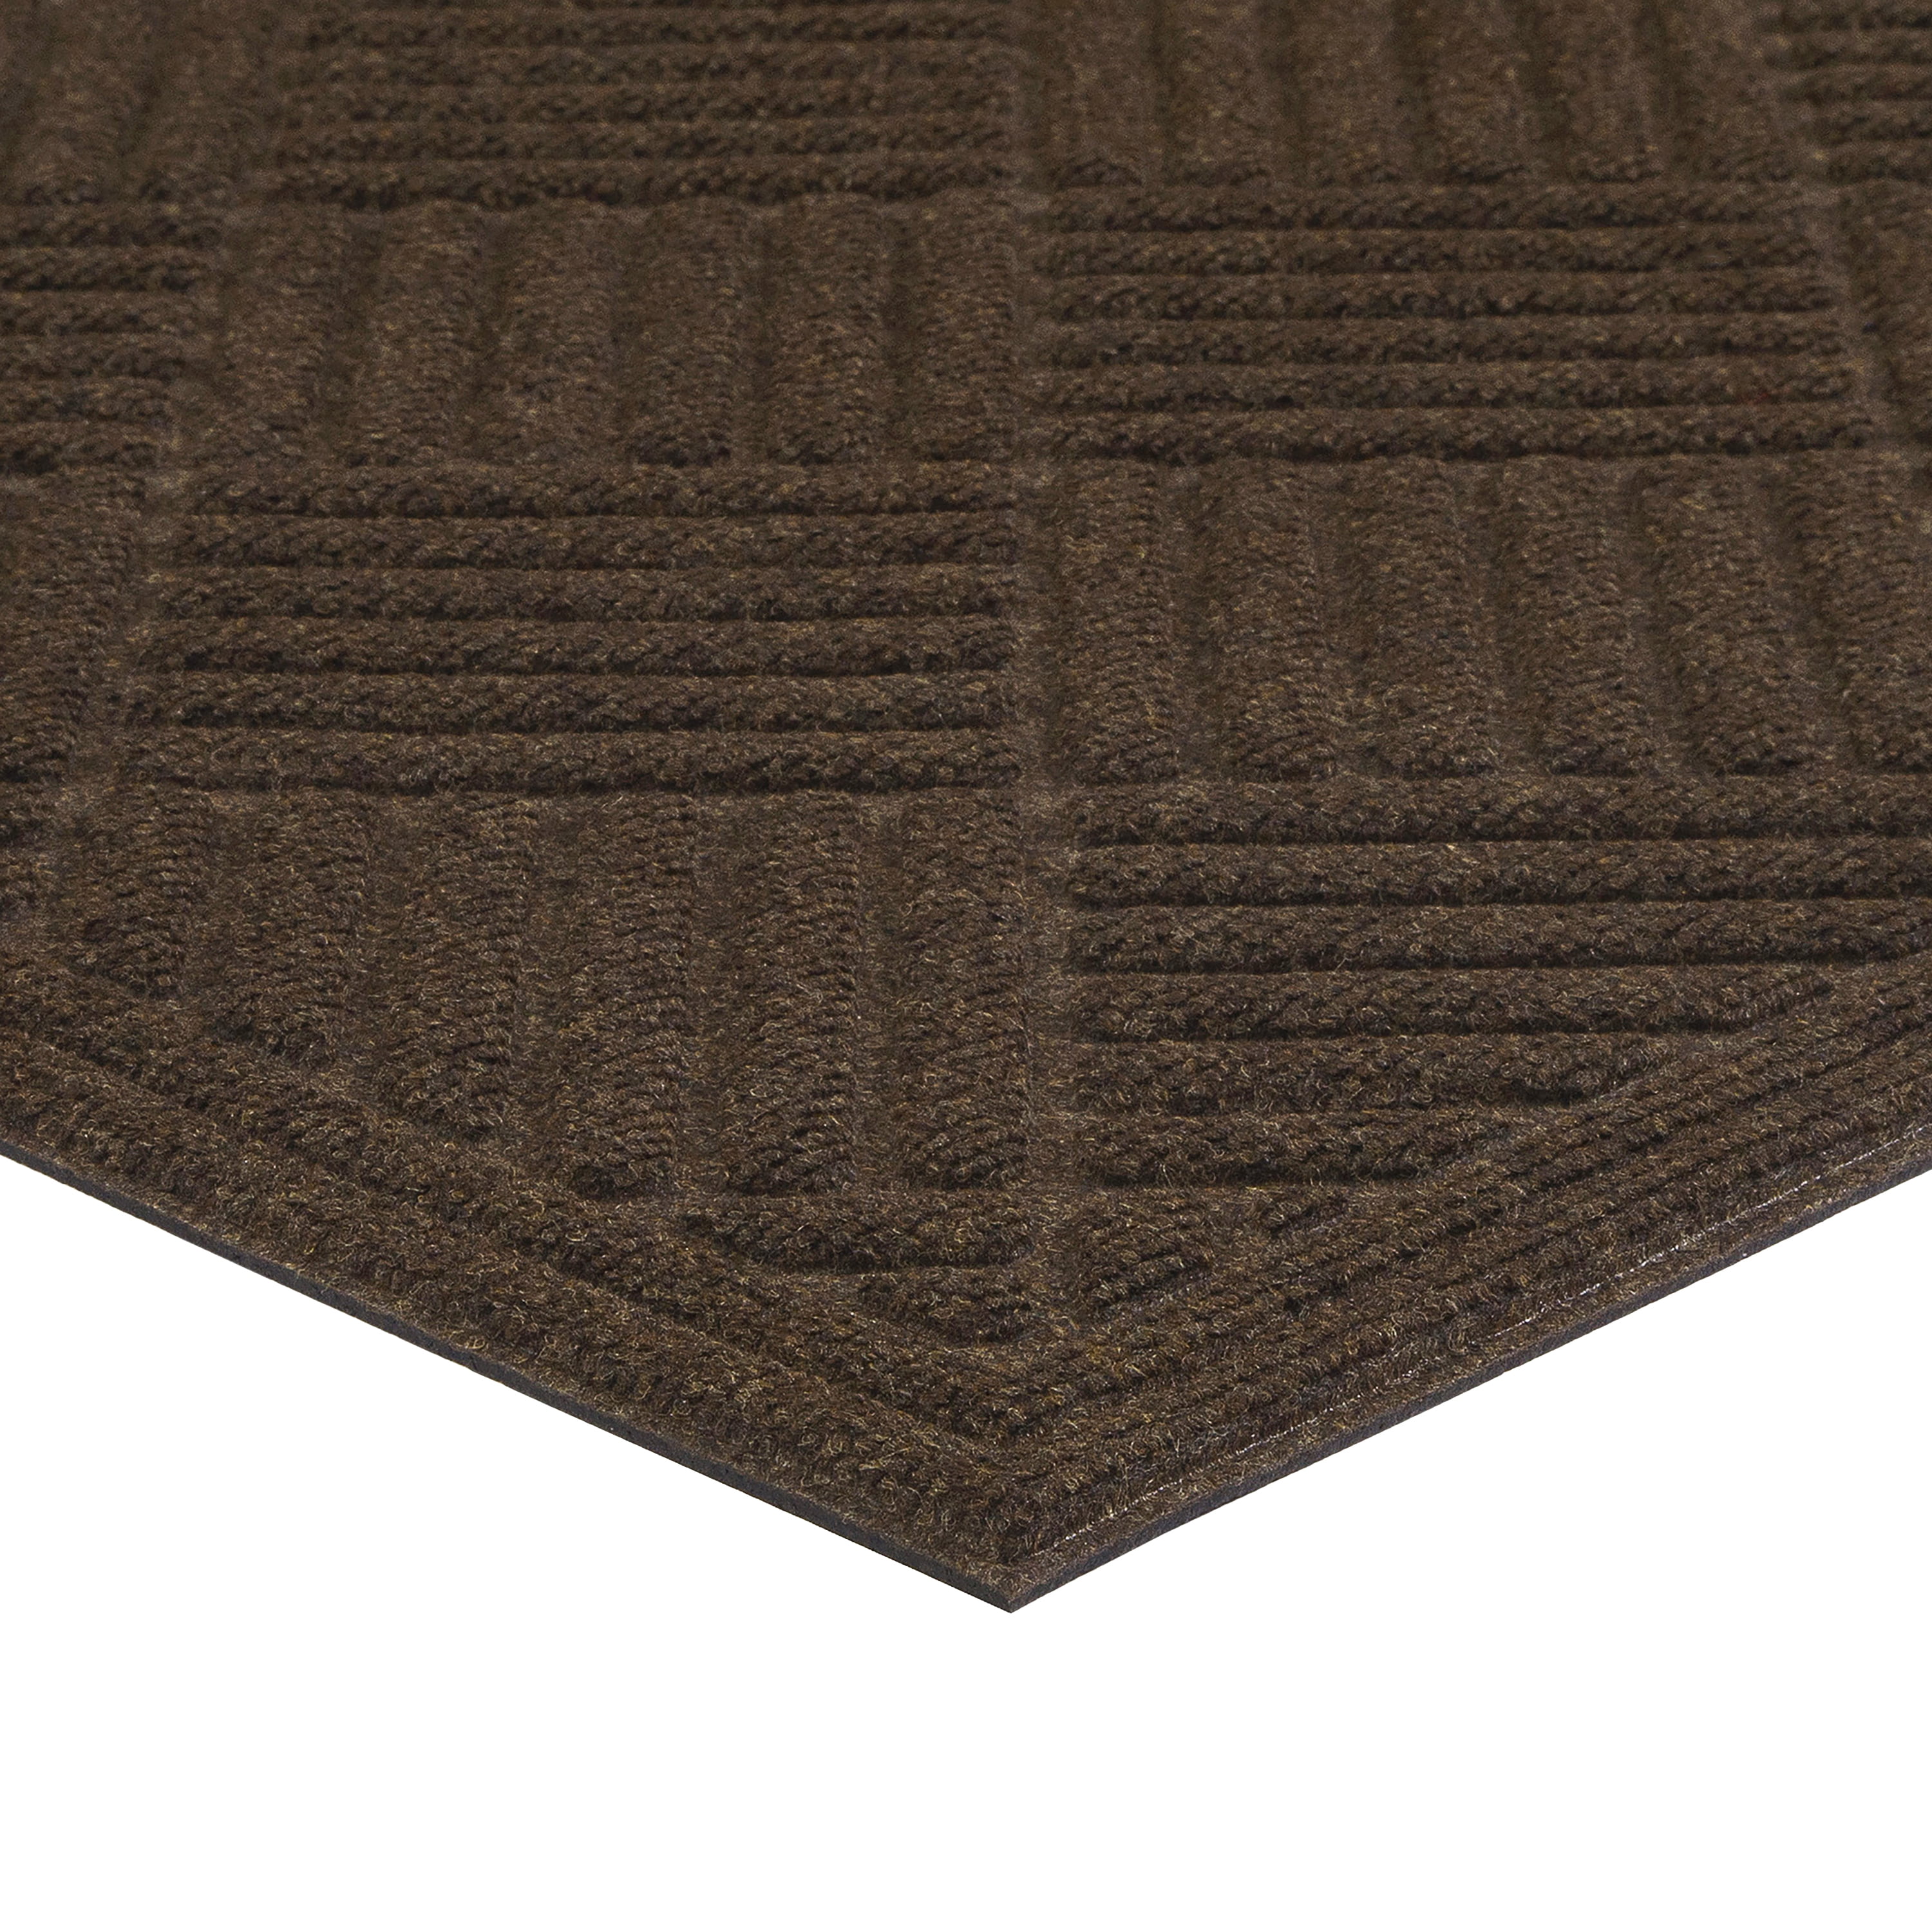 Dust removal and dust Flat-loop woven door mat. –